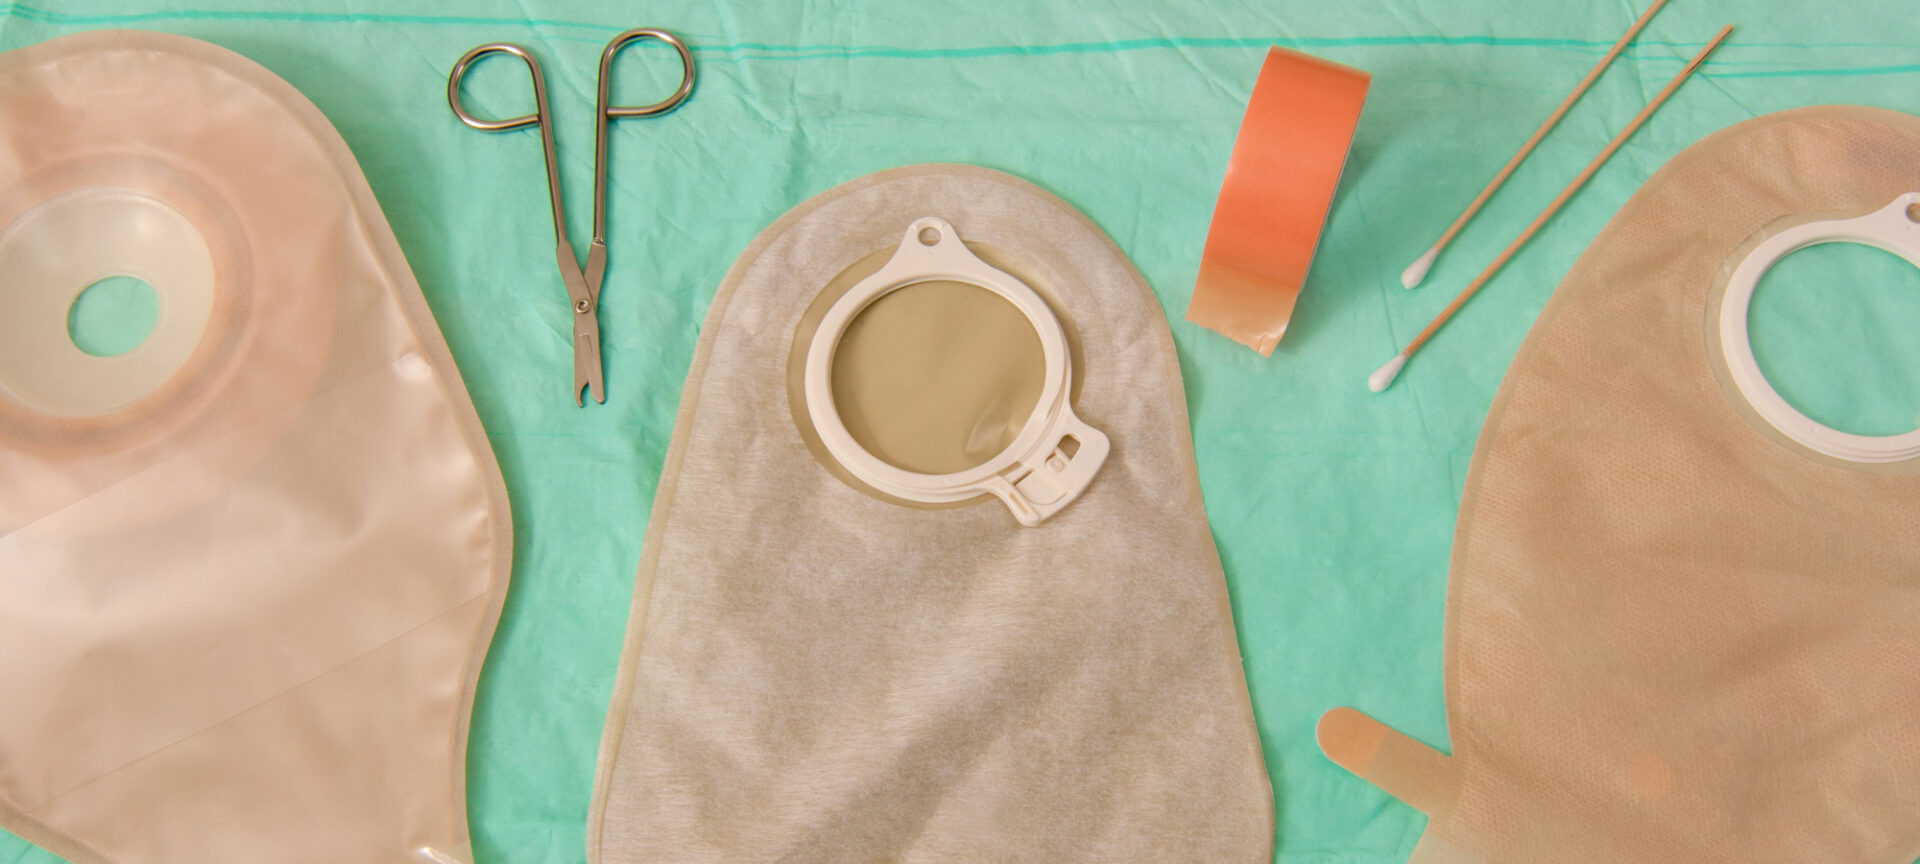 Sealing Comfort and Confidence: A Comprehensive Analysis of the Closed Ostomy Pouches Market